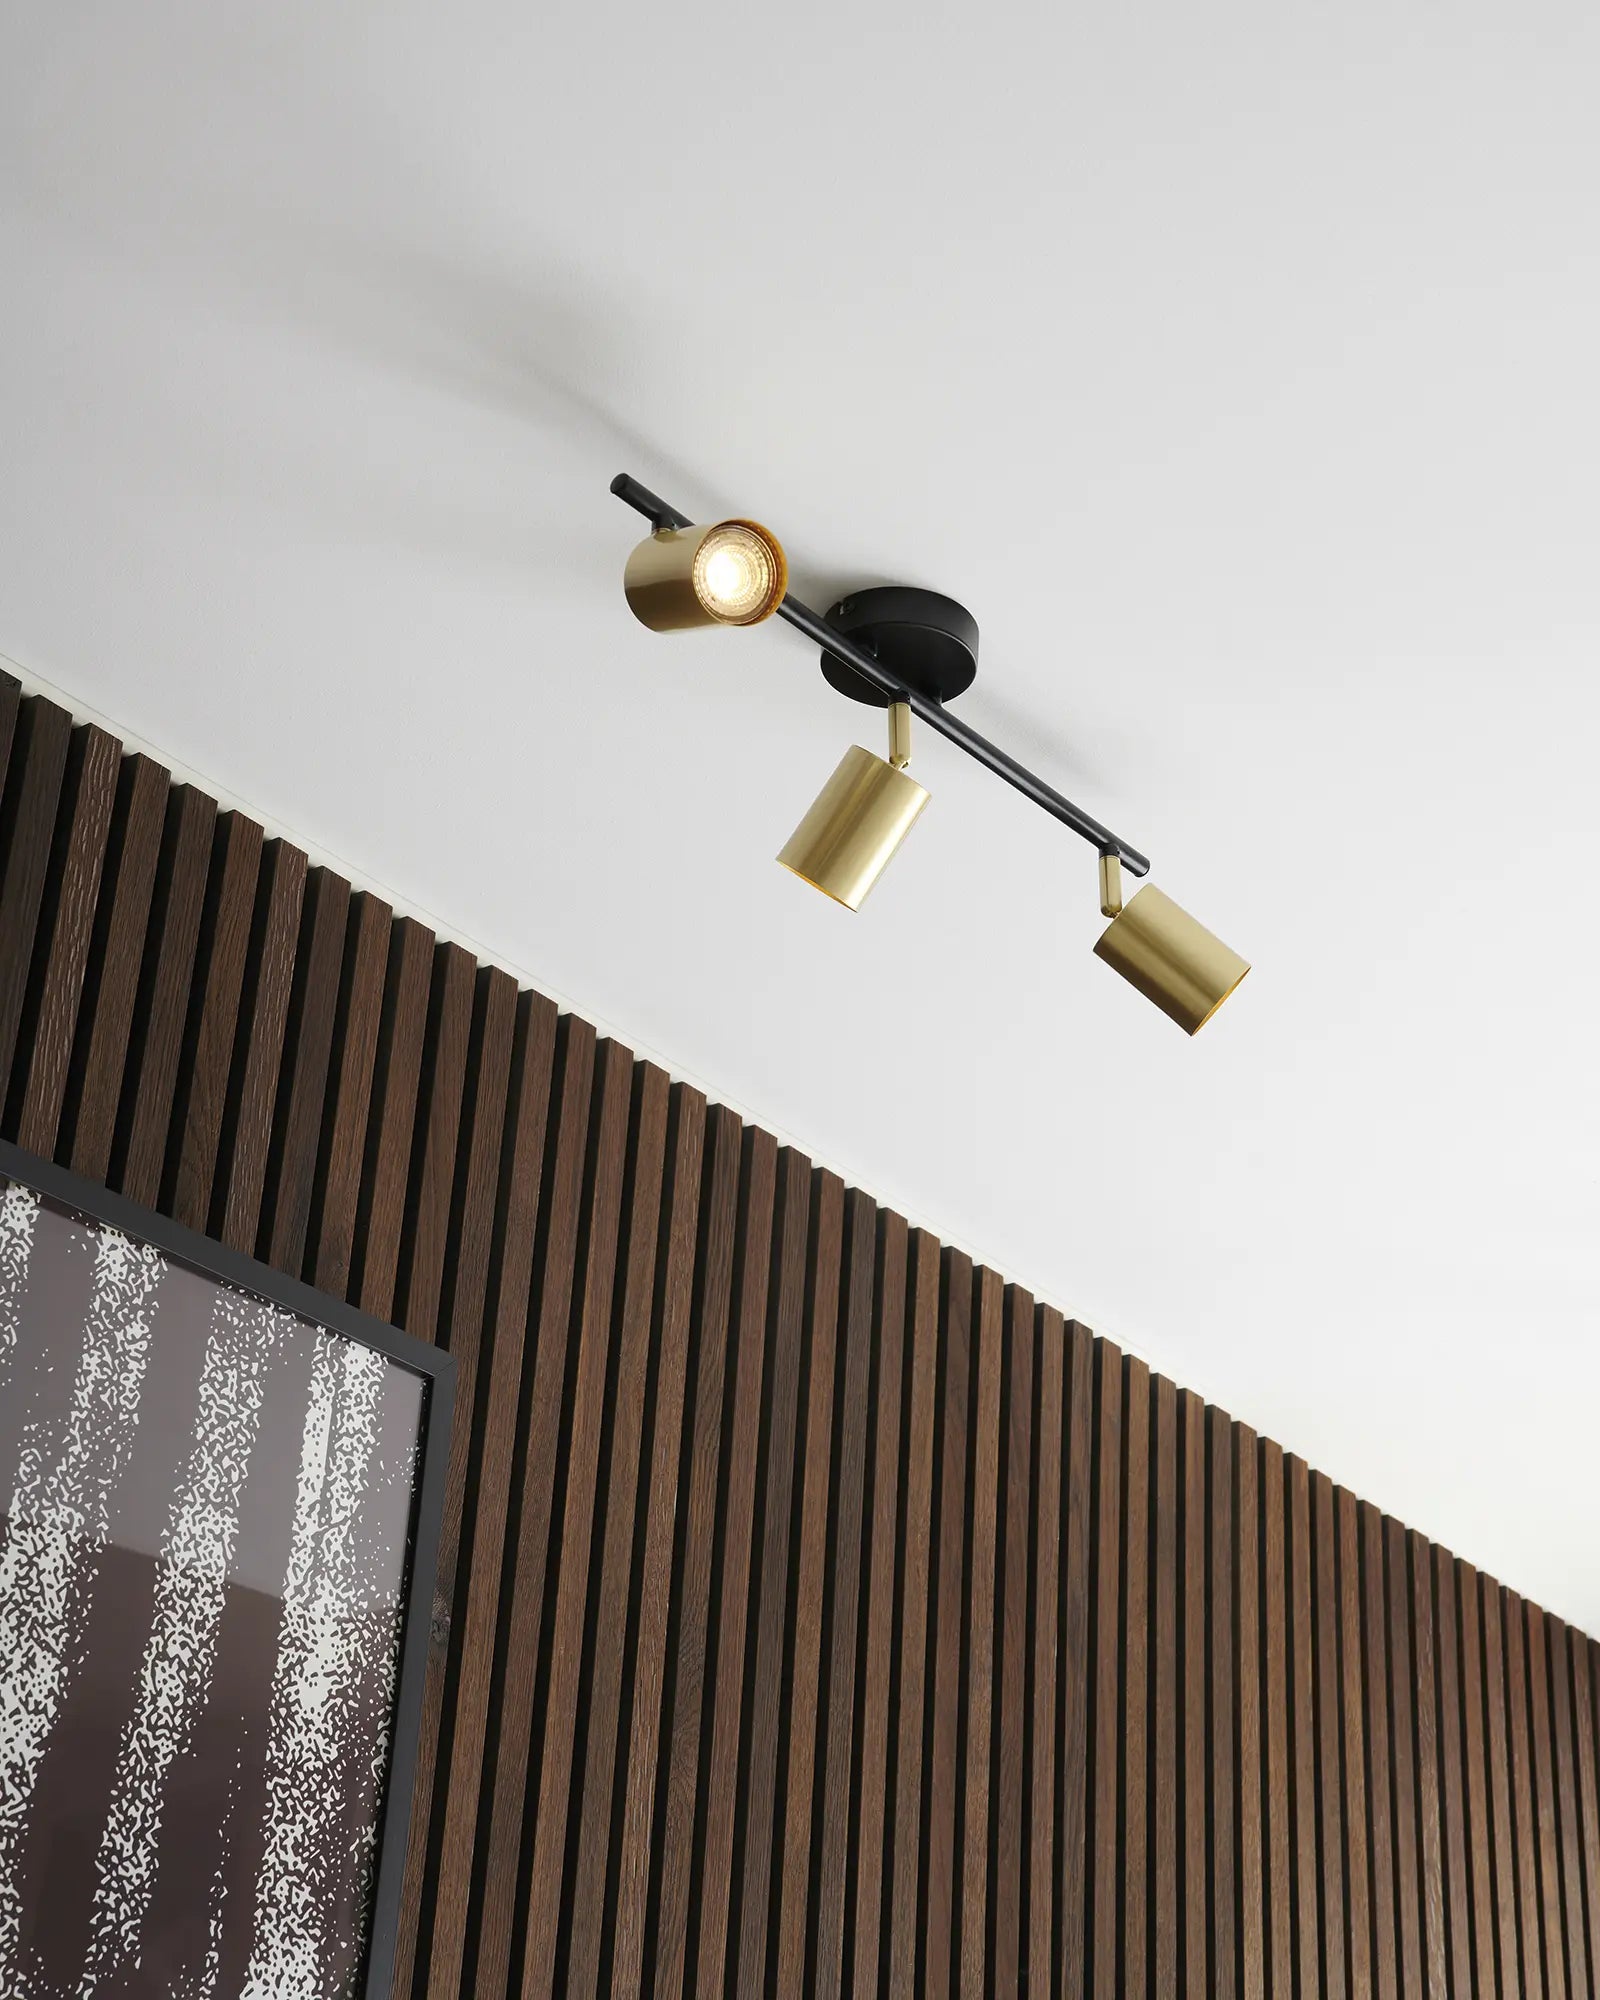 Explore 3 ceiling light showcasing a cladded wall and frame